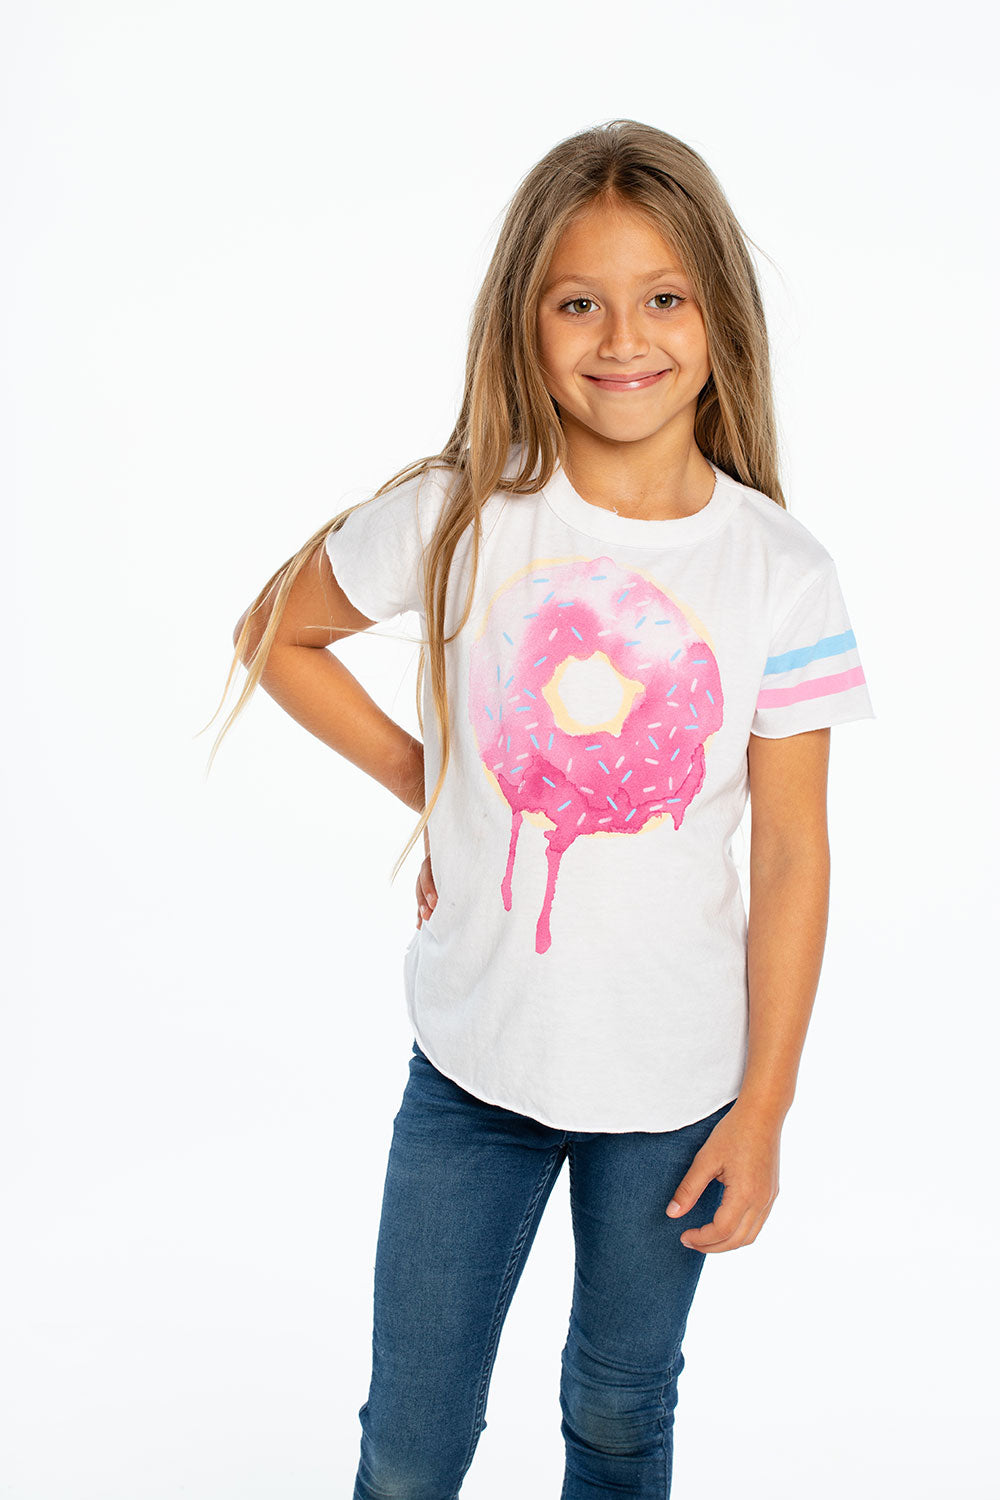 Girls Graphic Tops | chaserbrand.com